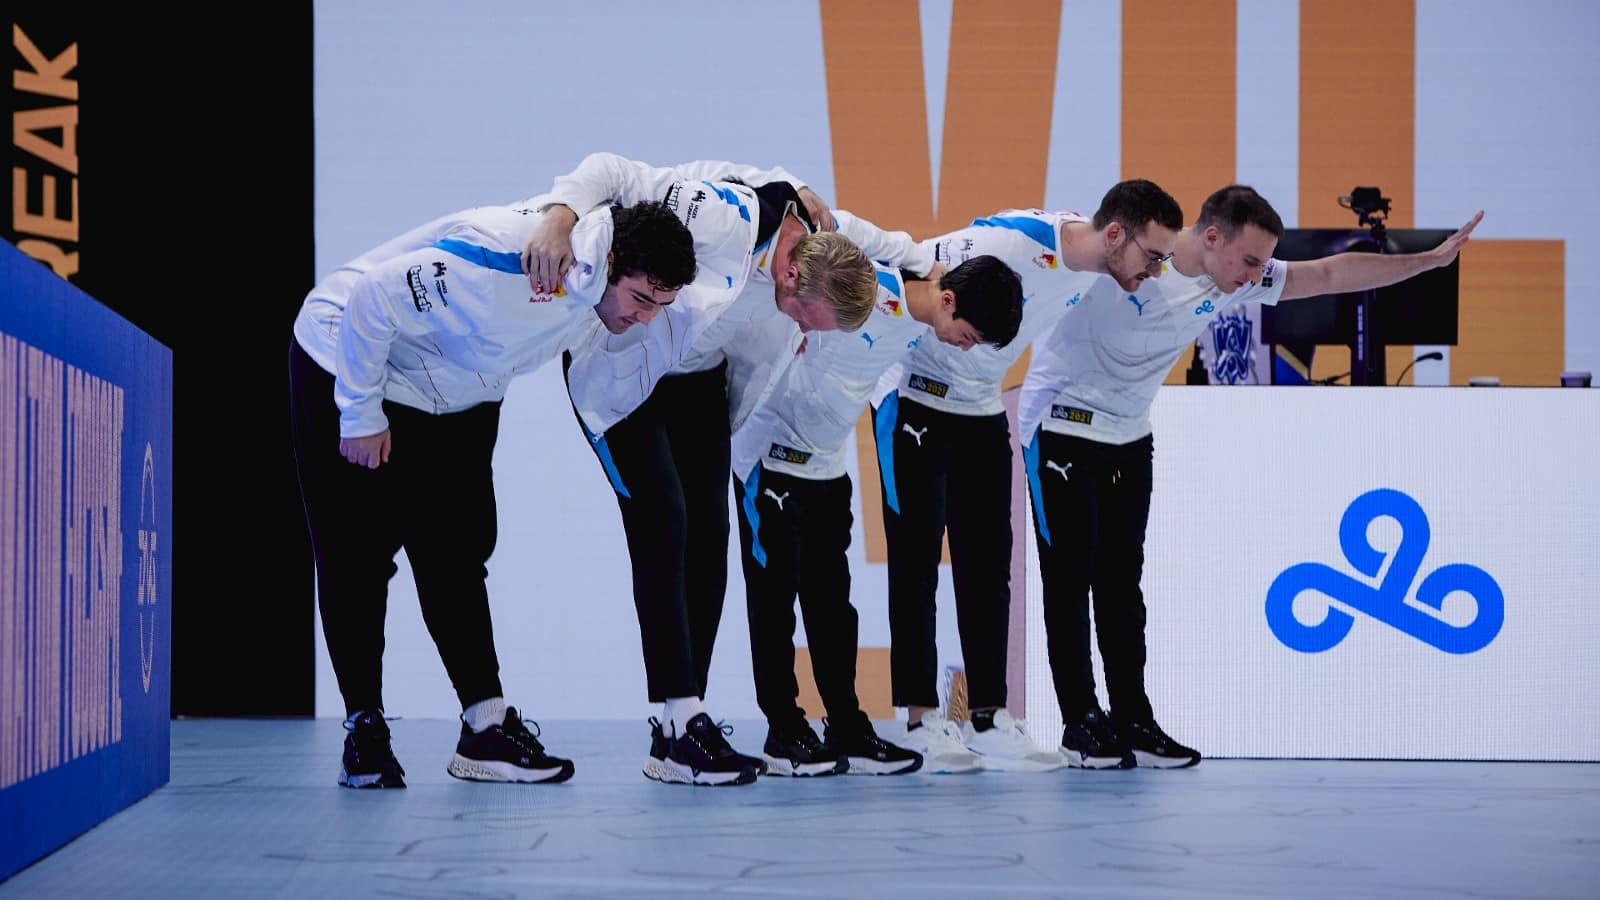 Cloud9 celebrating a win at Worlds 2021